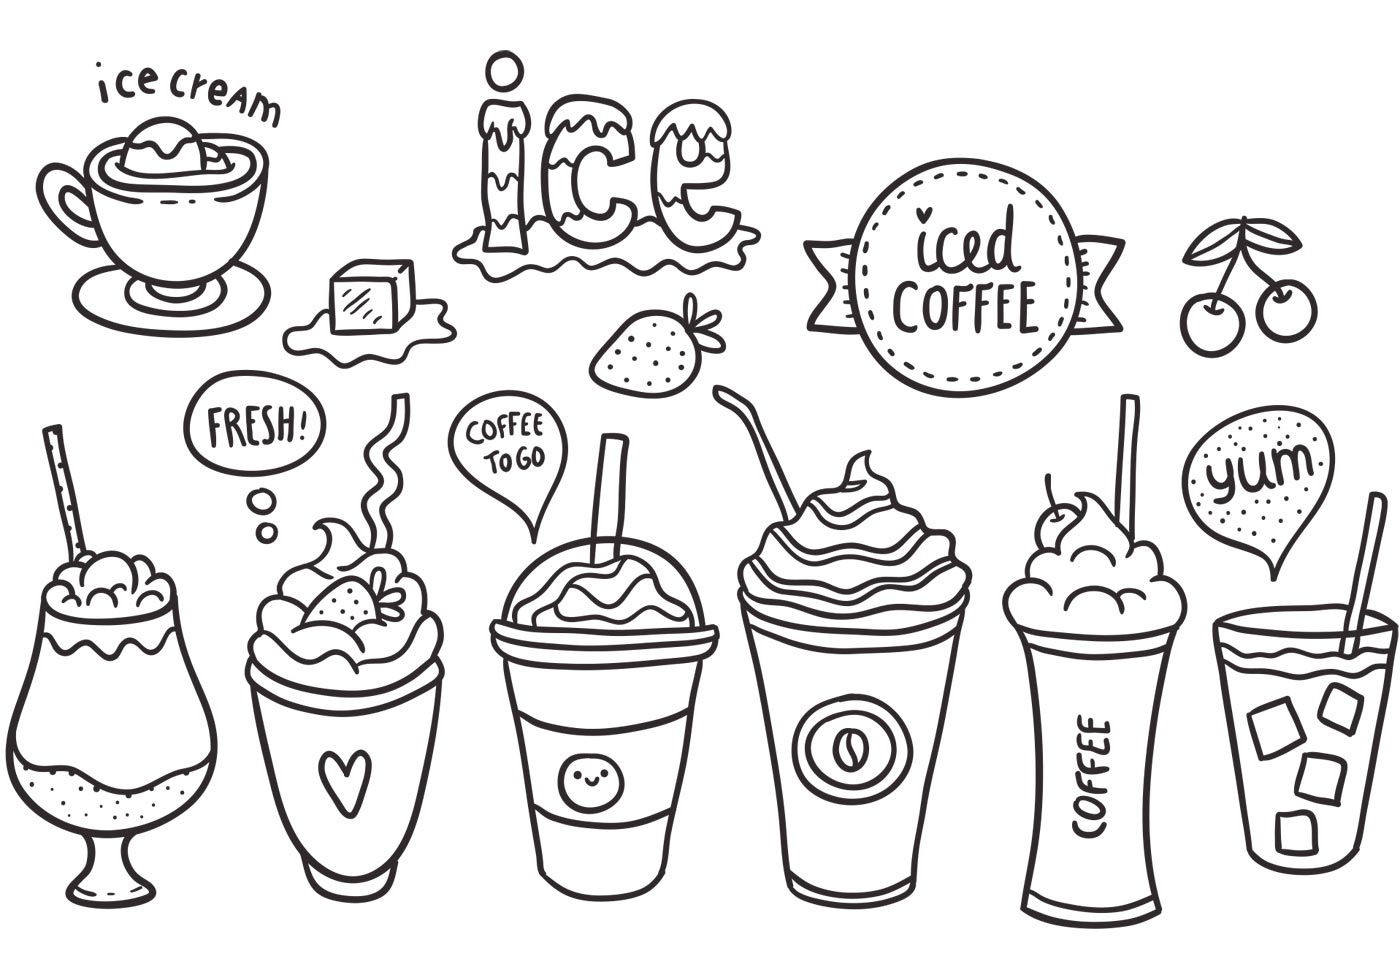 Download Free Iced Coffee Vector Pack 88930 Vector Art at Vecteezy